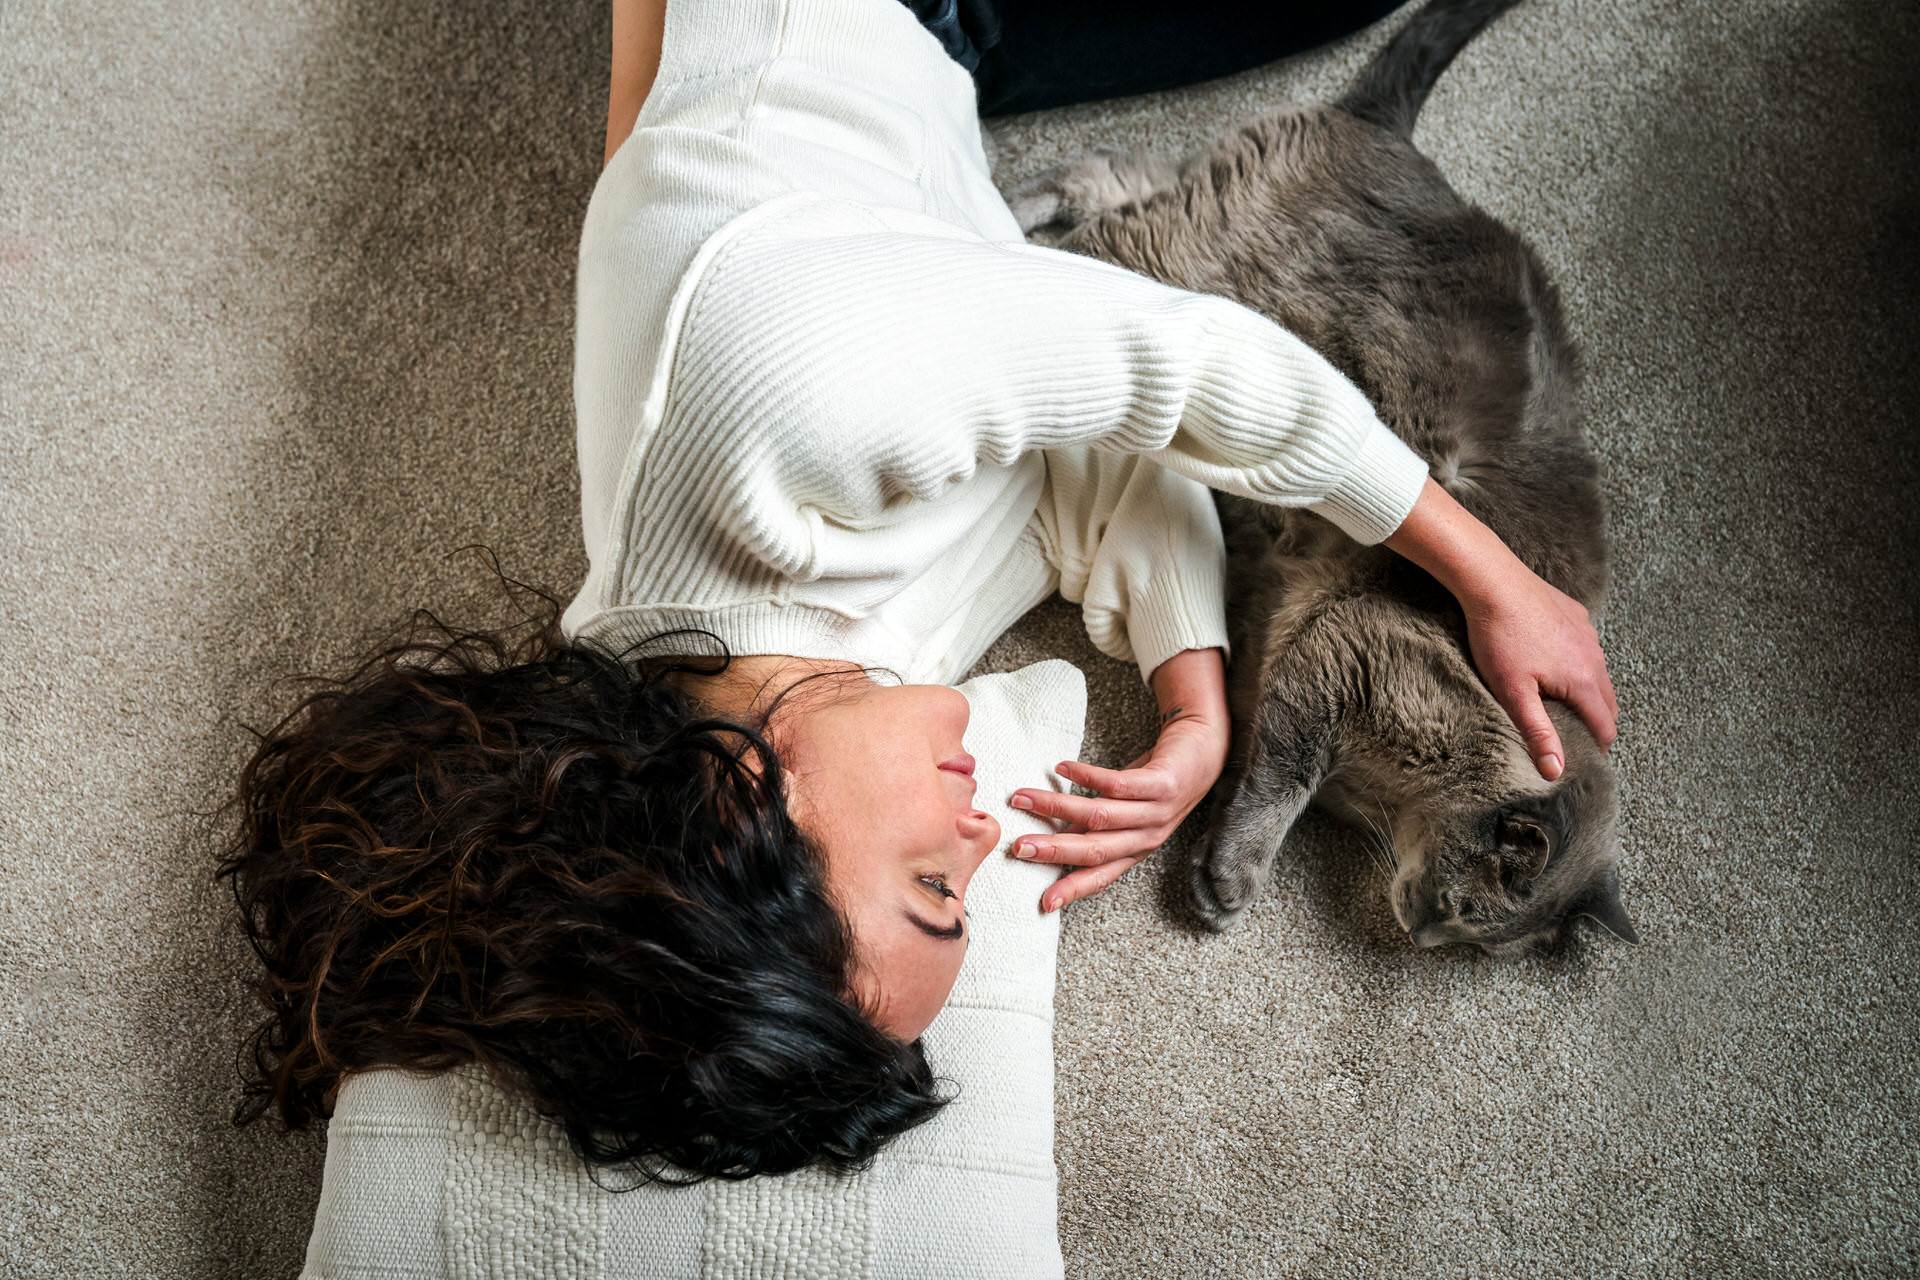 Woman laying with cat on carpet.